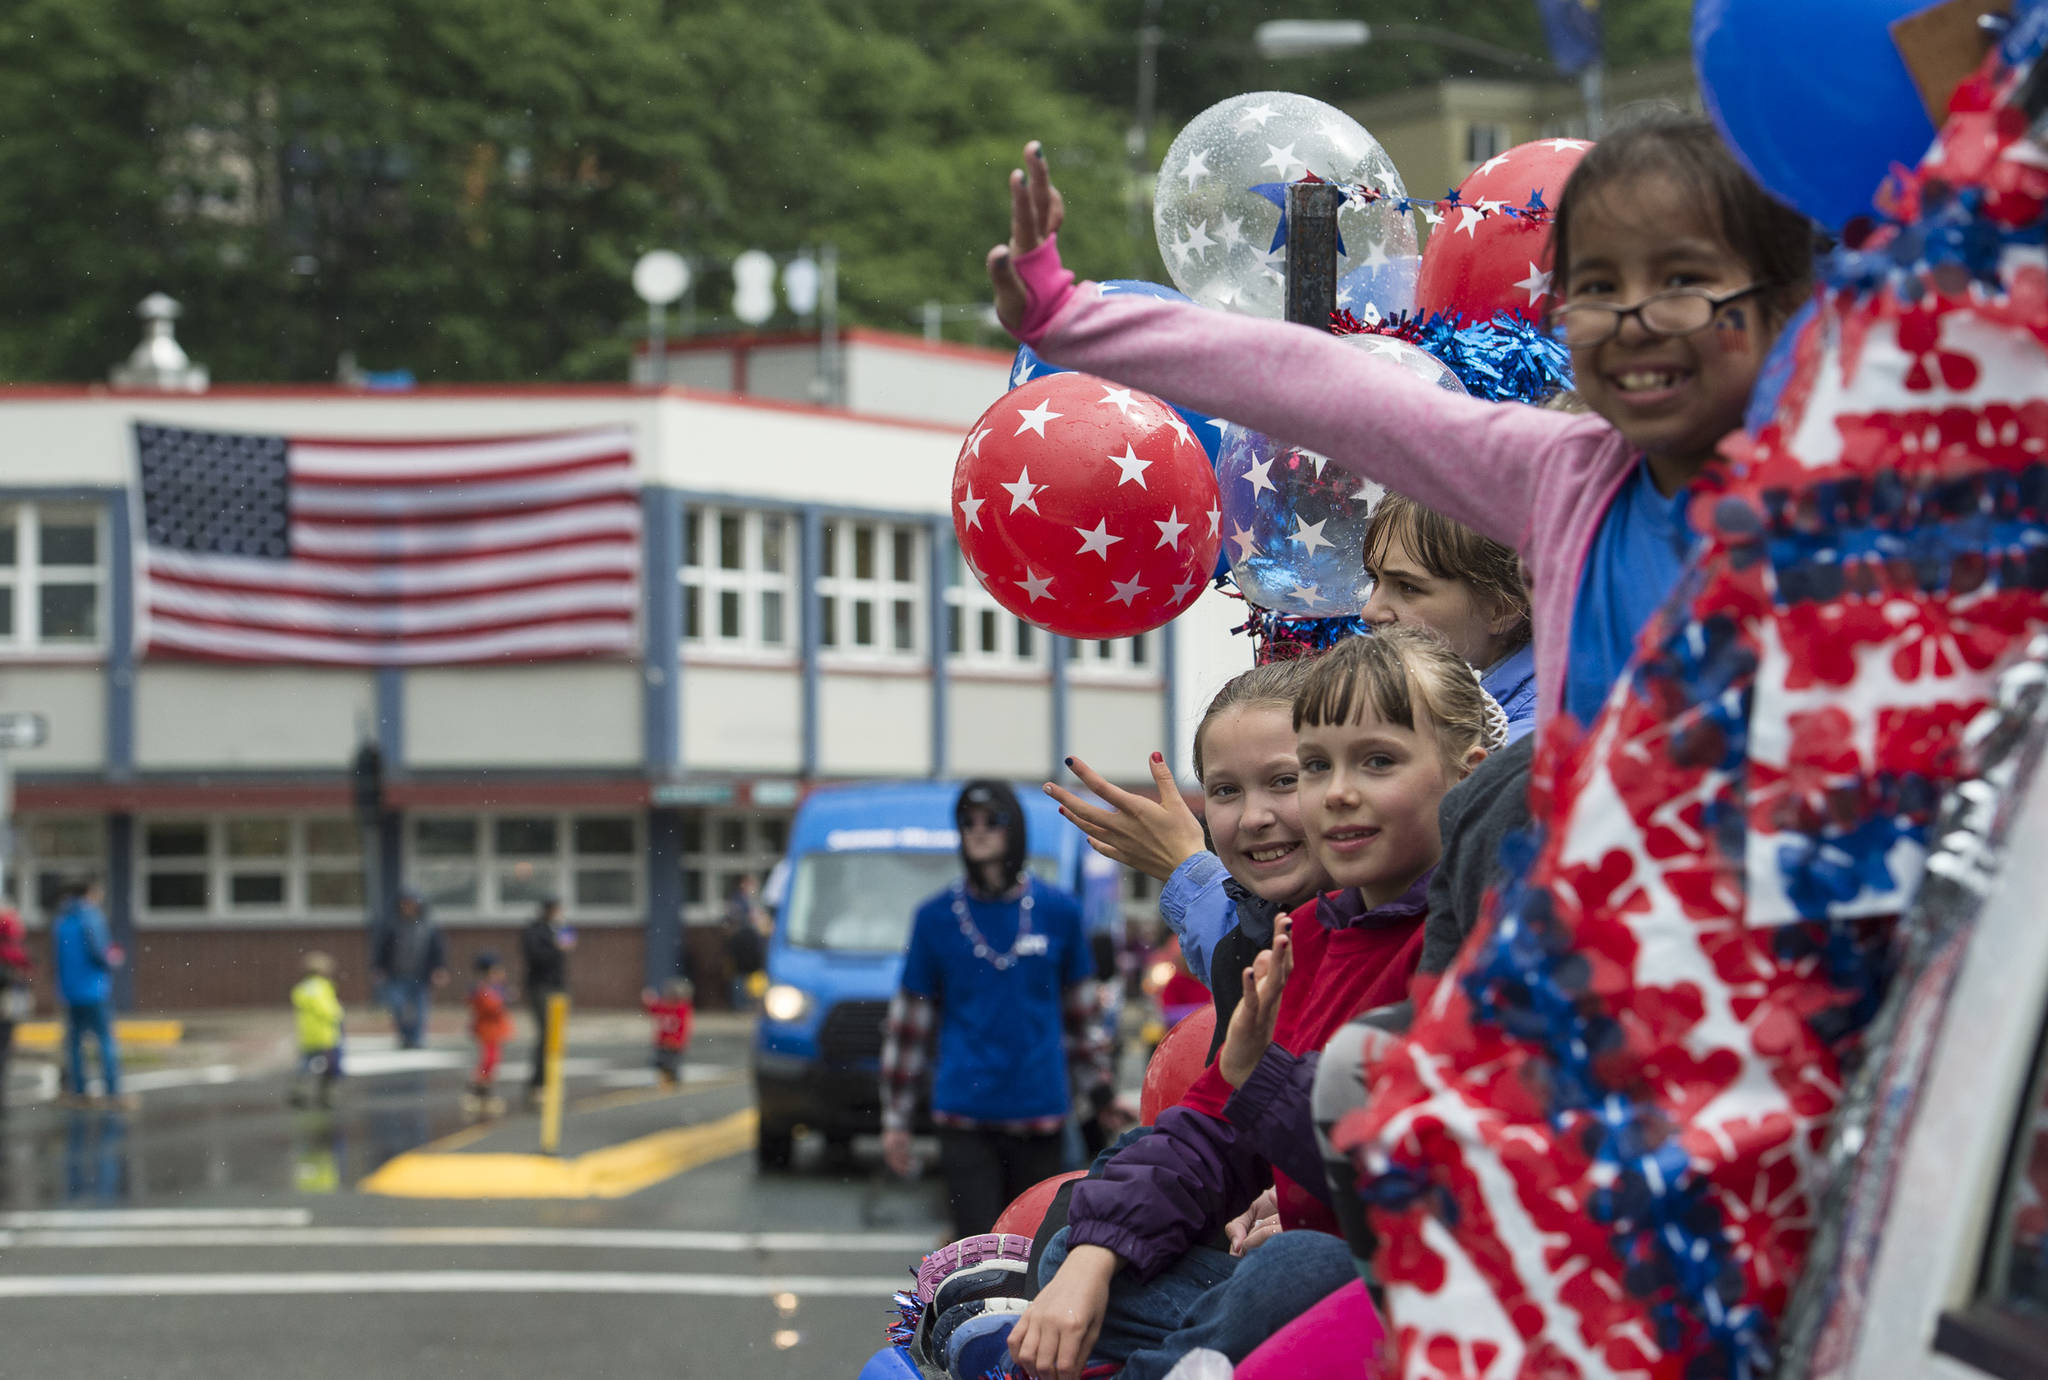 Scenes from the Juneau Fourth of July parade in 2017. (Michael Penn | Juneau Empire File)